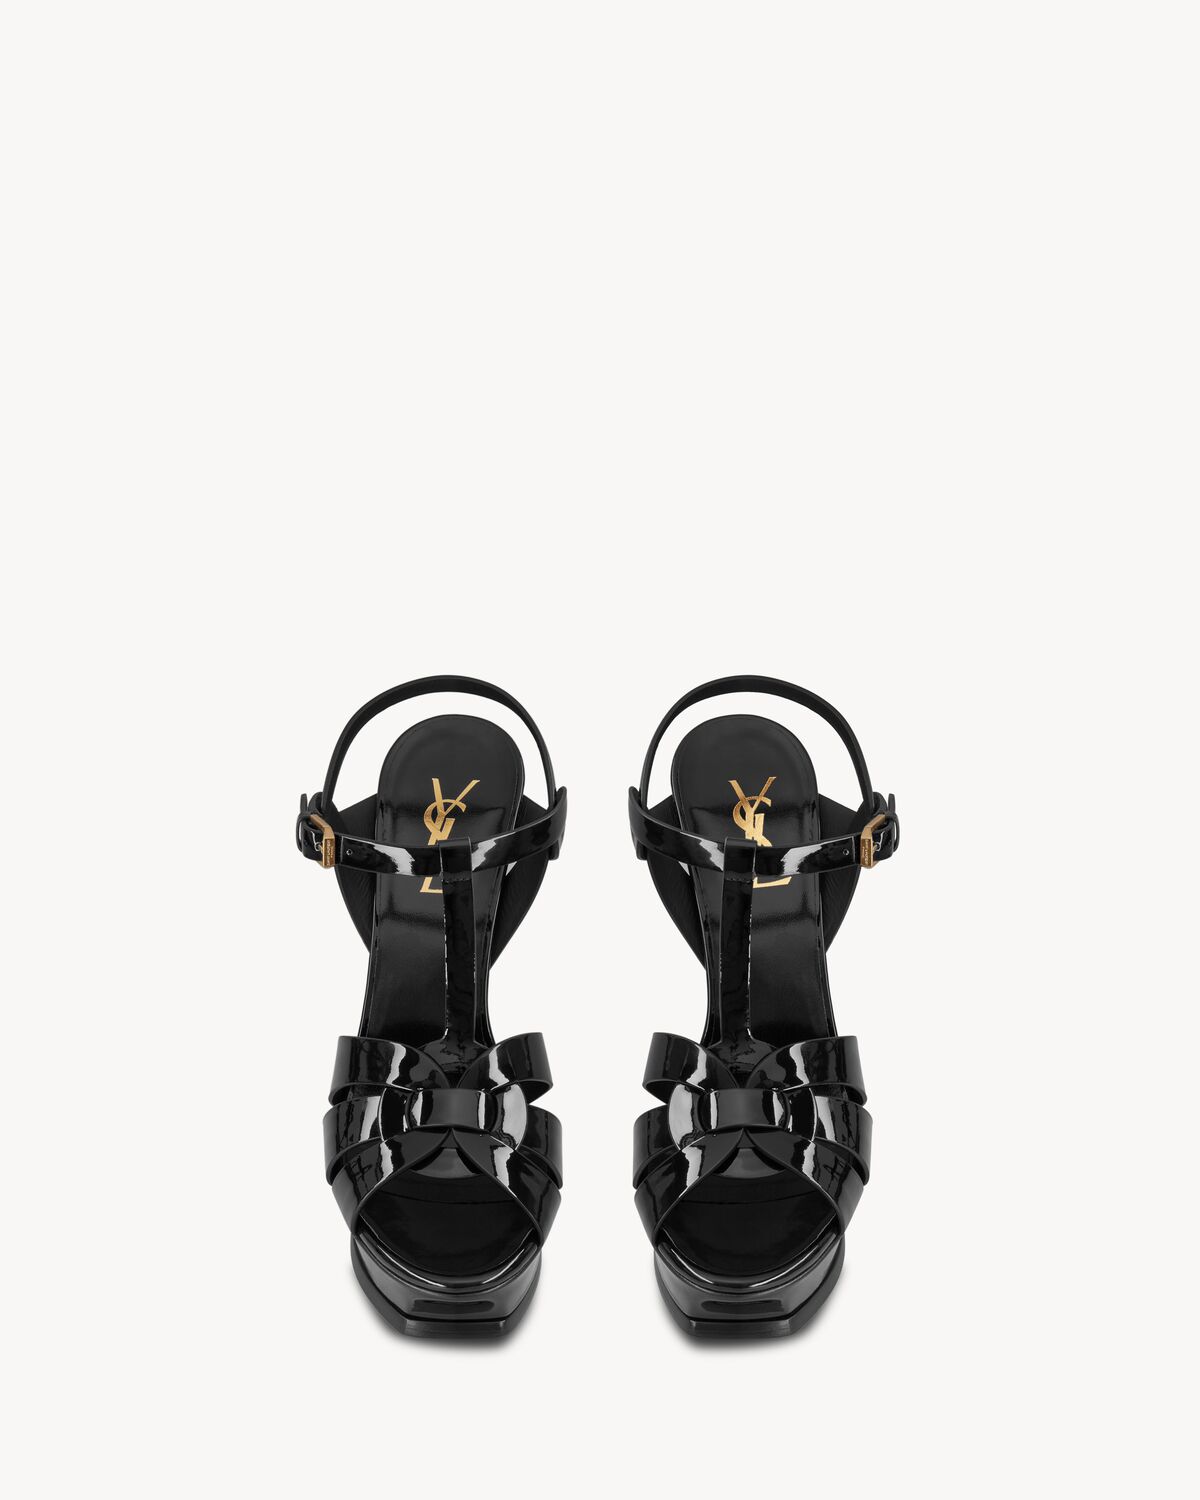 TRIBUTE platform sandals in patent leather